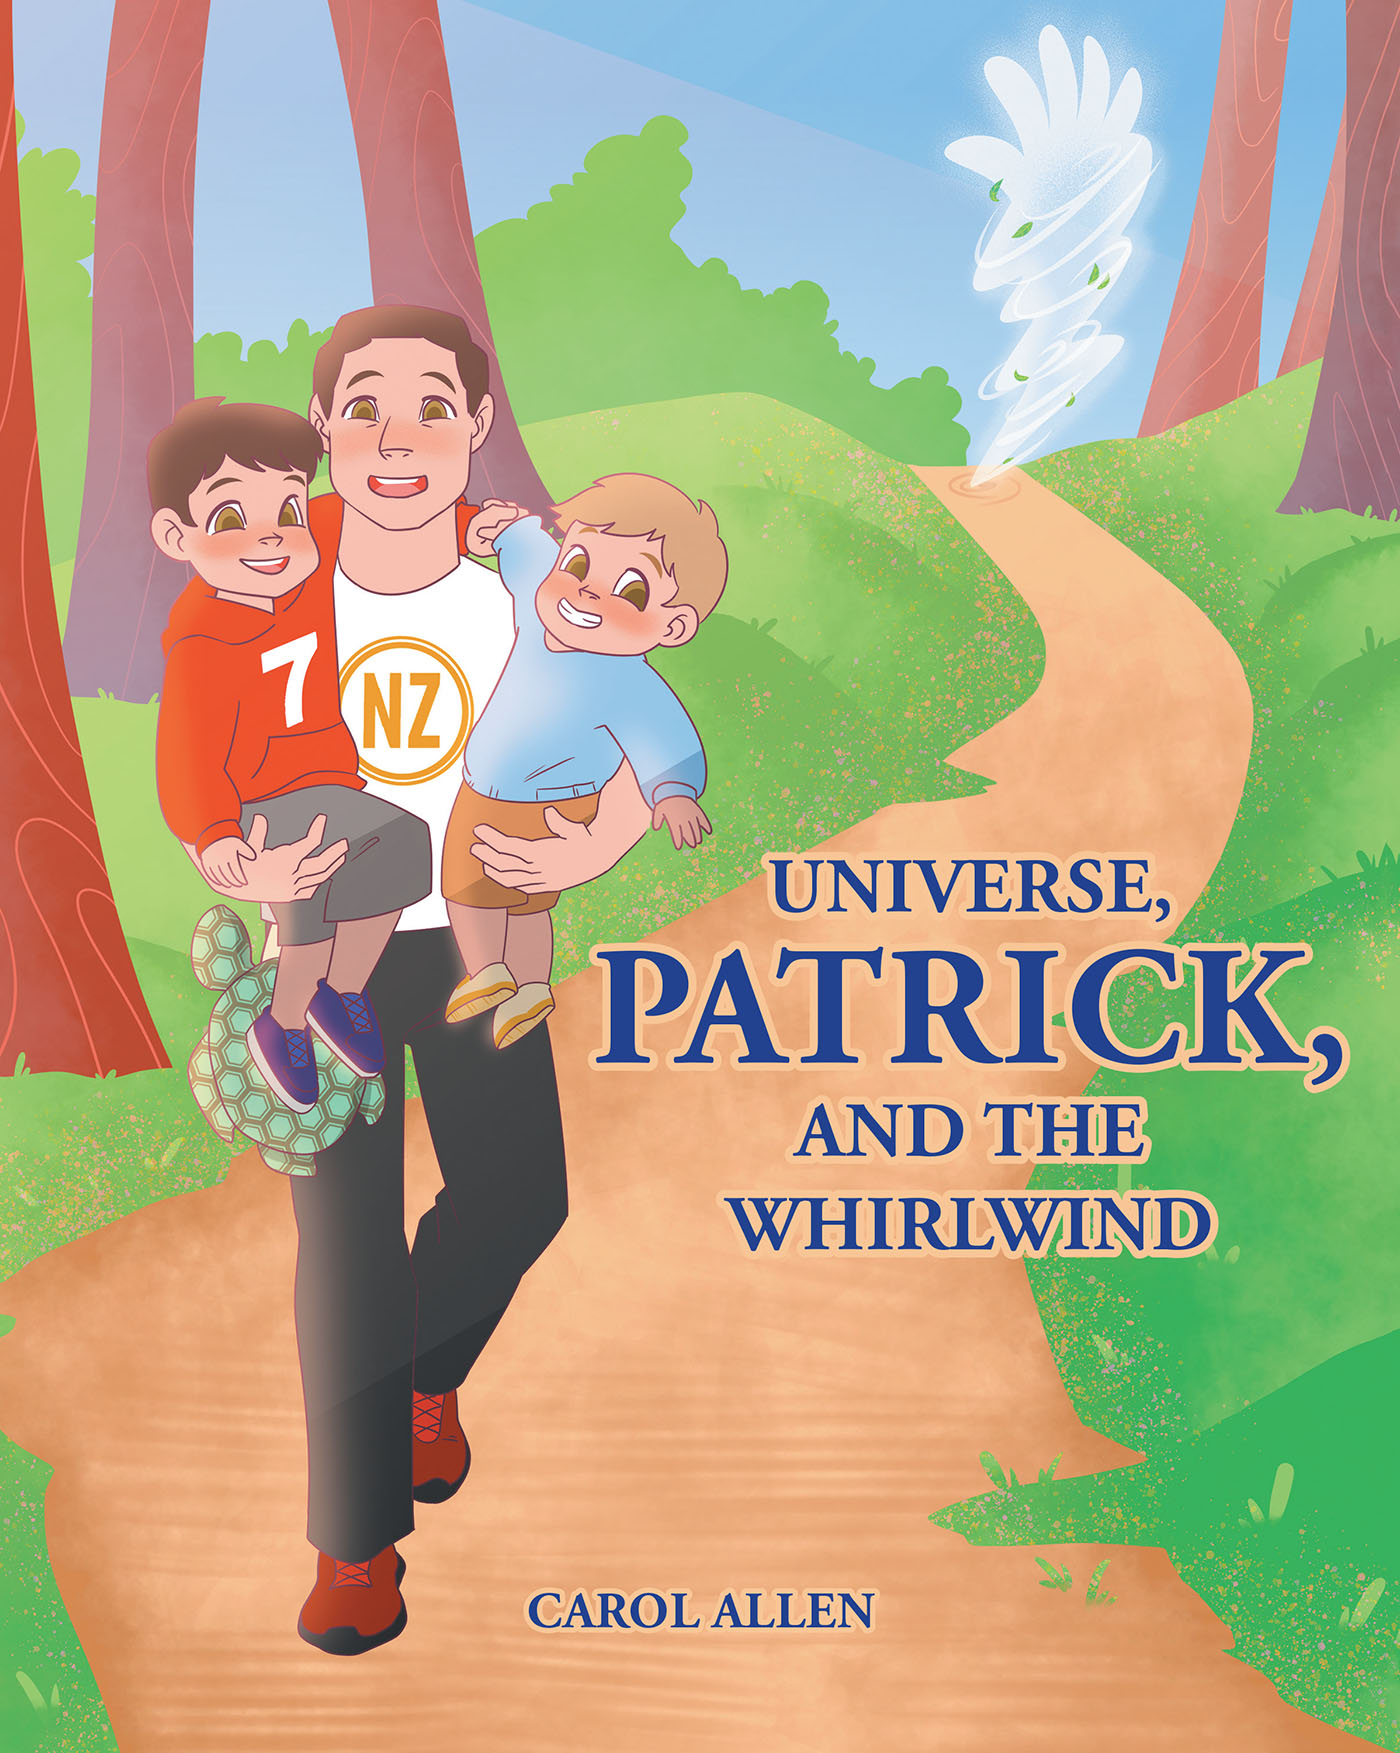 Author Carol Allen’s New Book, "Universe, Patrick, and the Whirlwind," is an Engaging Children’s Story with an Important Message for Readers of All Ages